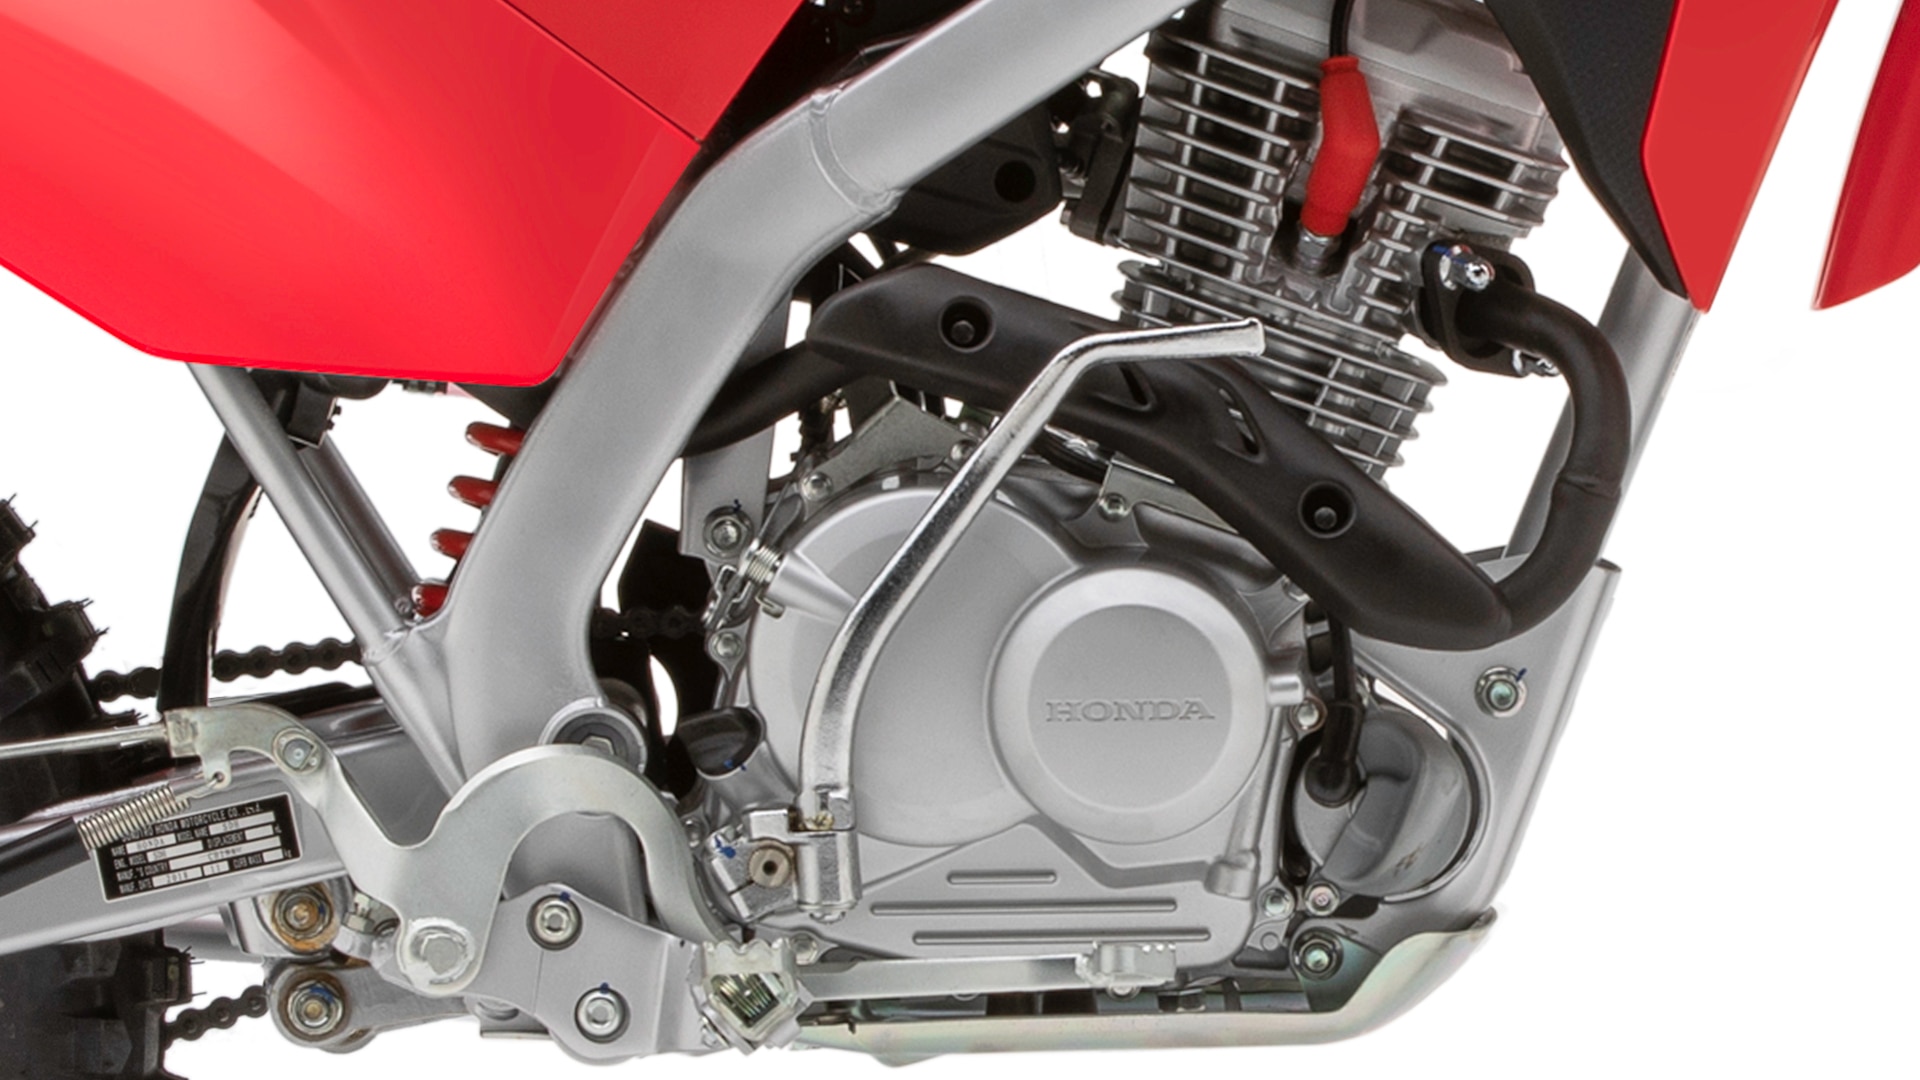 Close-up of 4-stroke air-cooled single-cylinder 125 cc engine and frame.